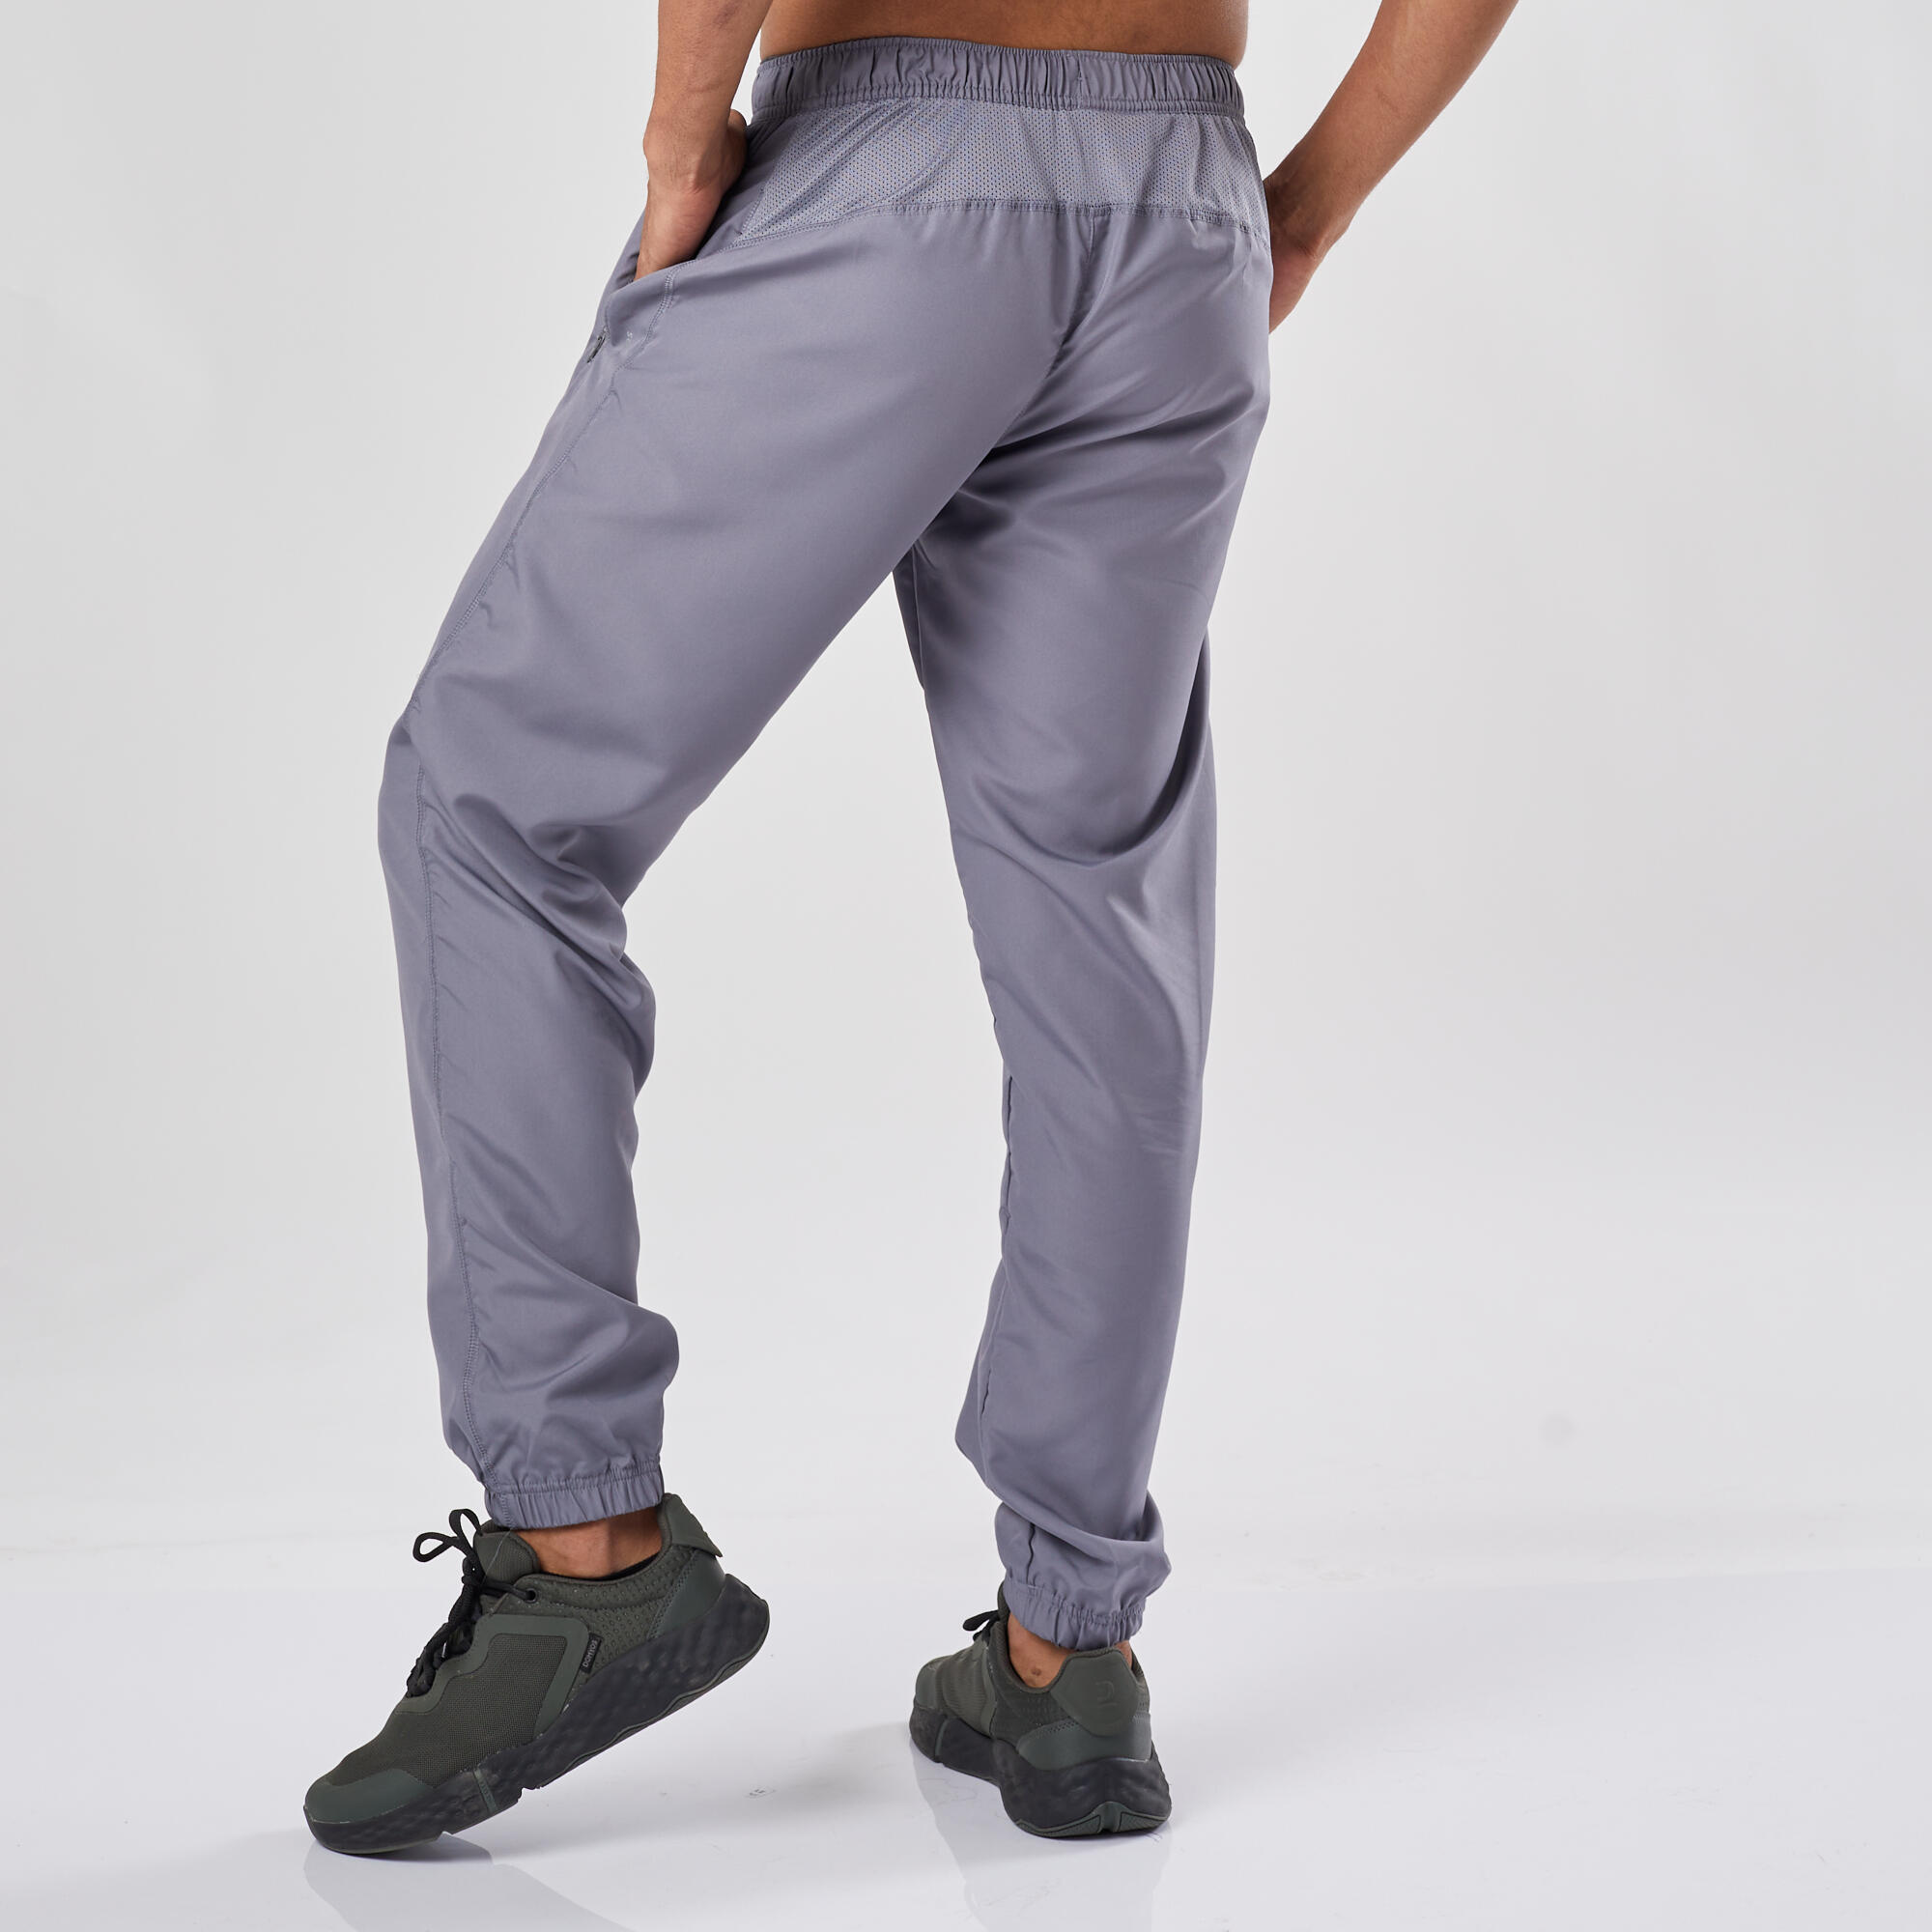 Domyos by Decathlon Men Solid Grey Quick Dry Training Track Pants :  Amazon.in: Clothing & Accessories